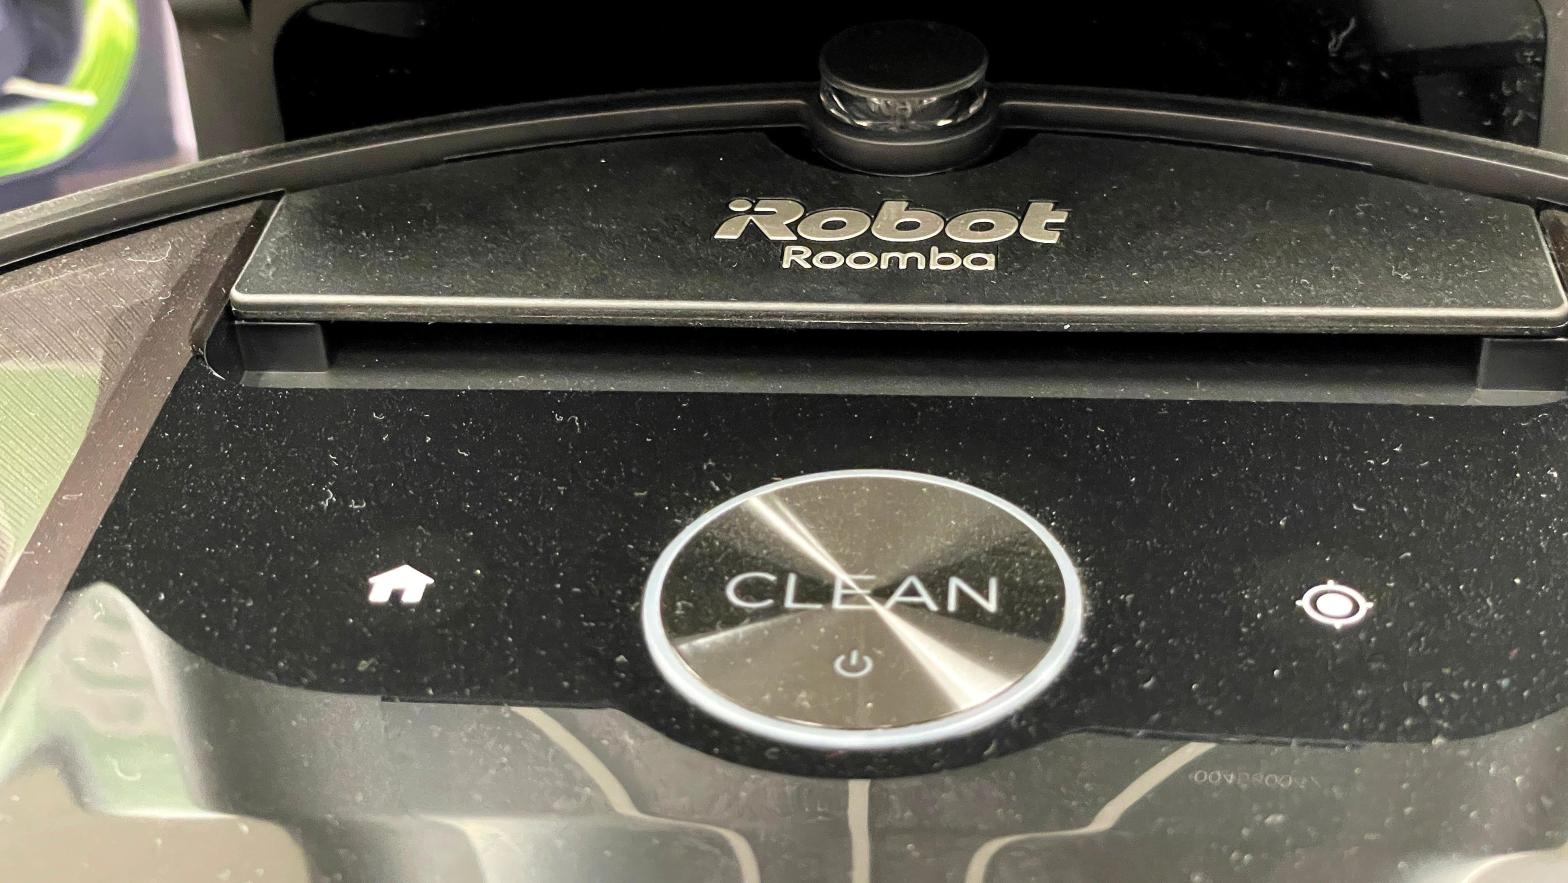 iRobot Roomba devices allow users to activate cleaning functions with a button press, but they require access to the application for basically any other promised feature. (Photo: Justin Sullivan, Getty Images)